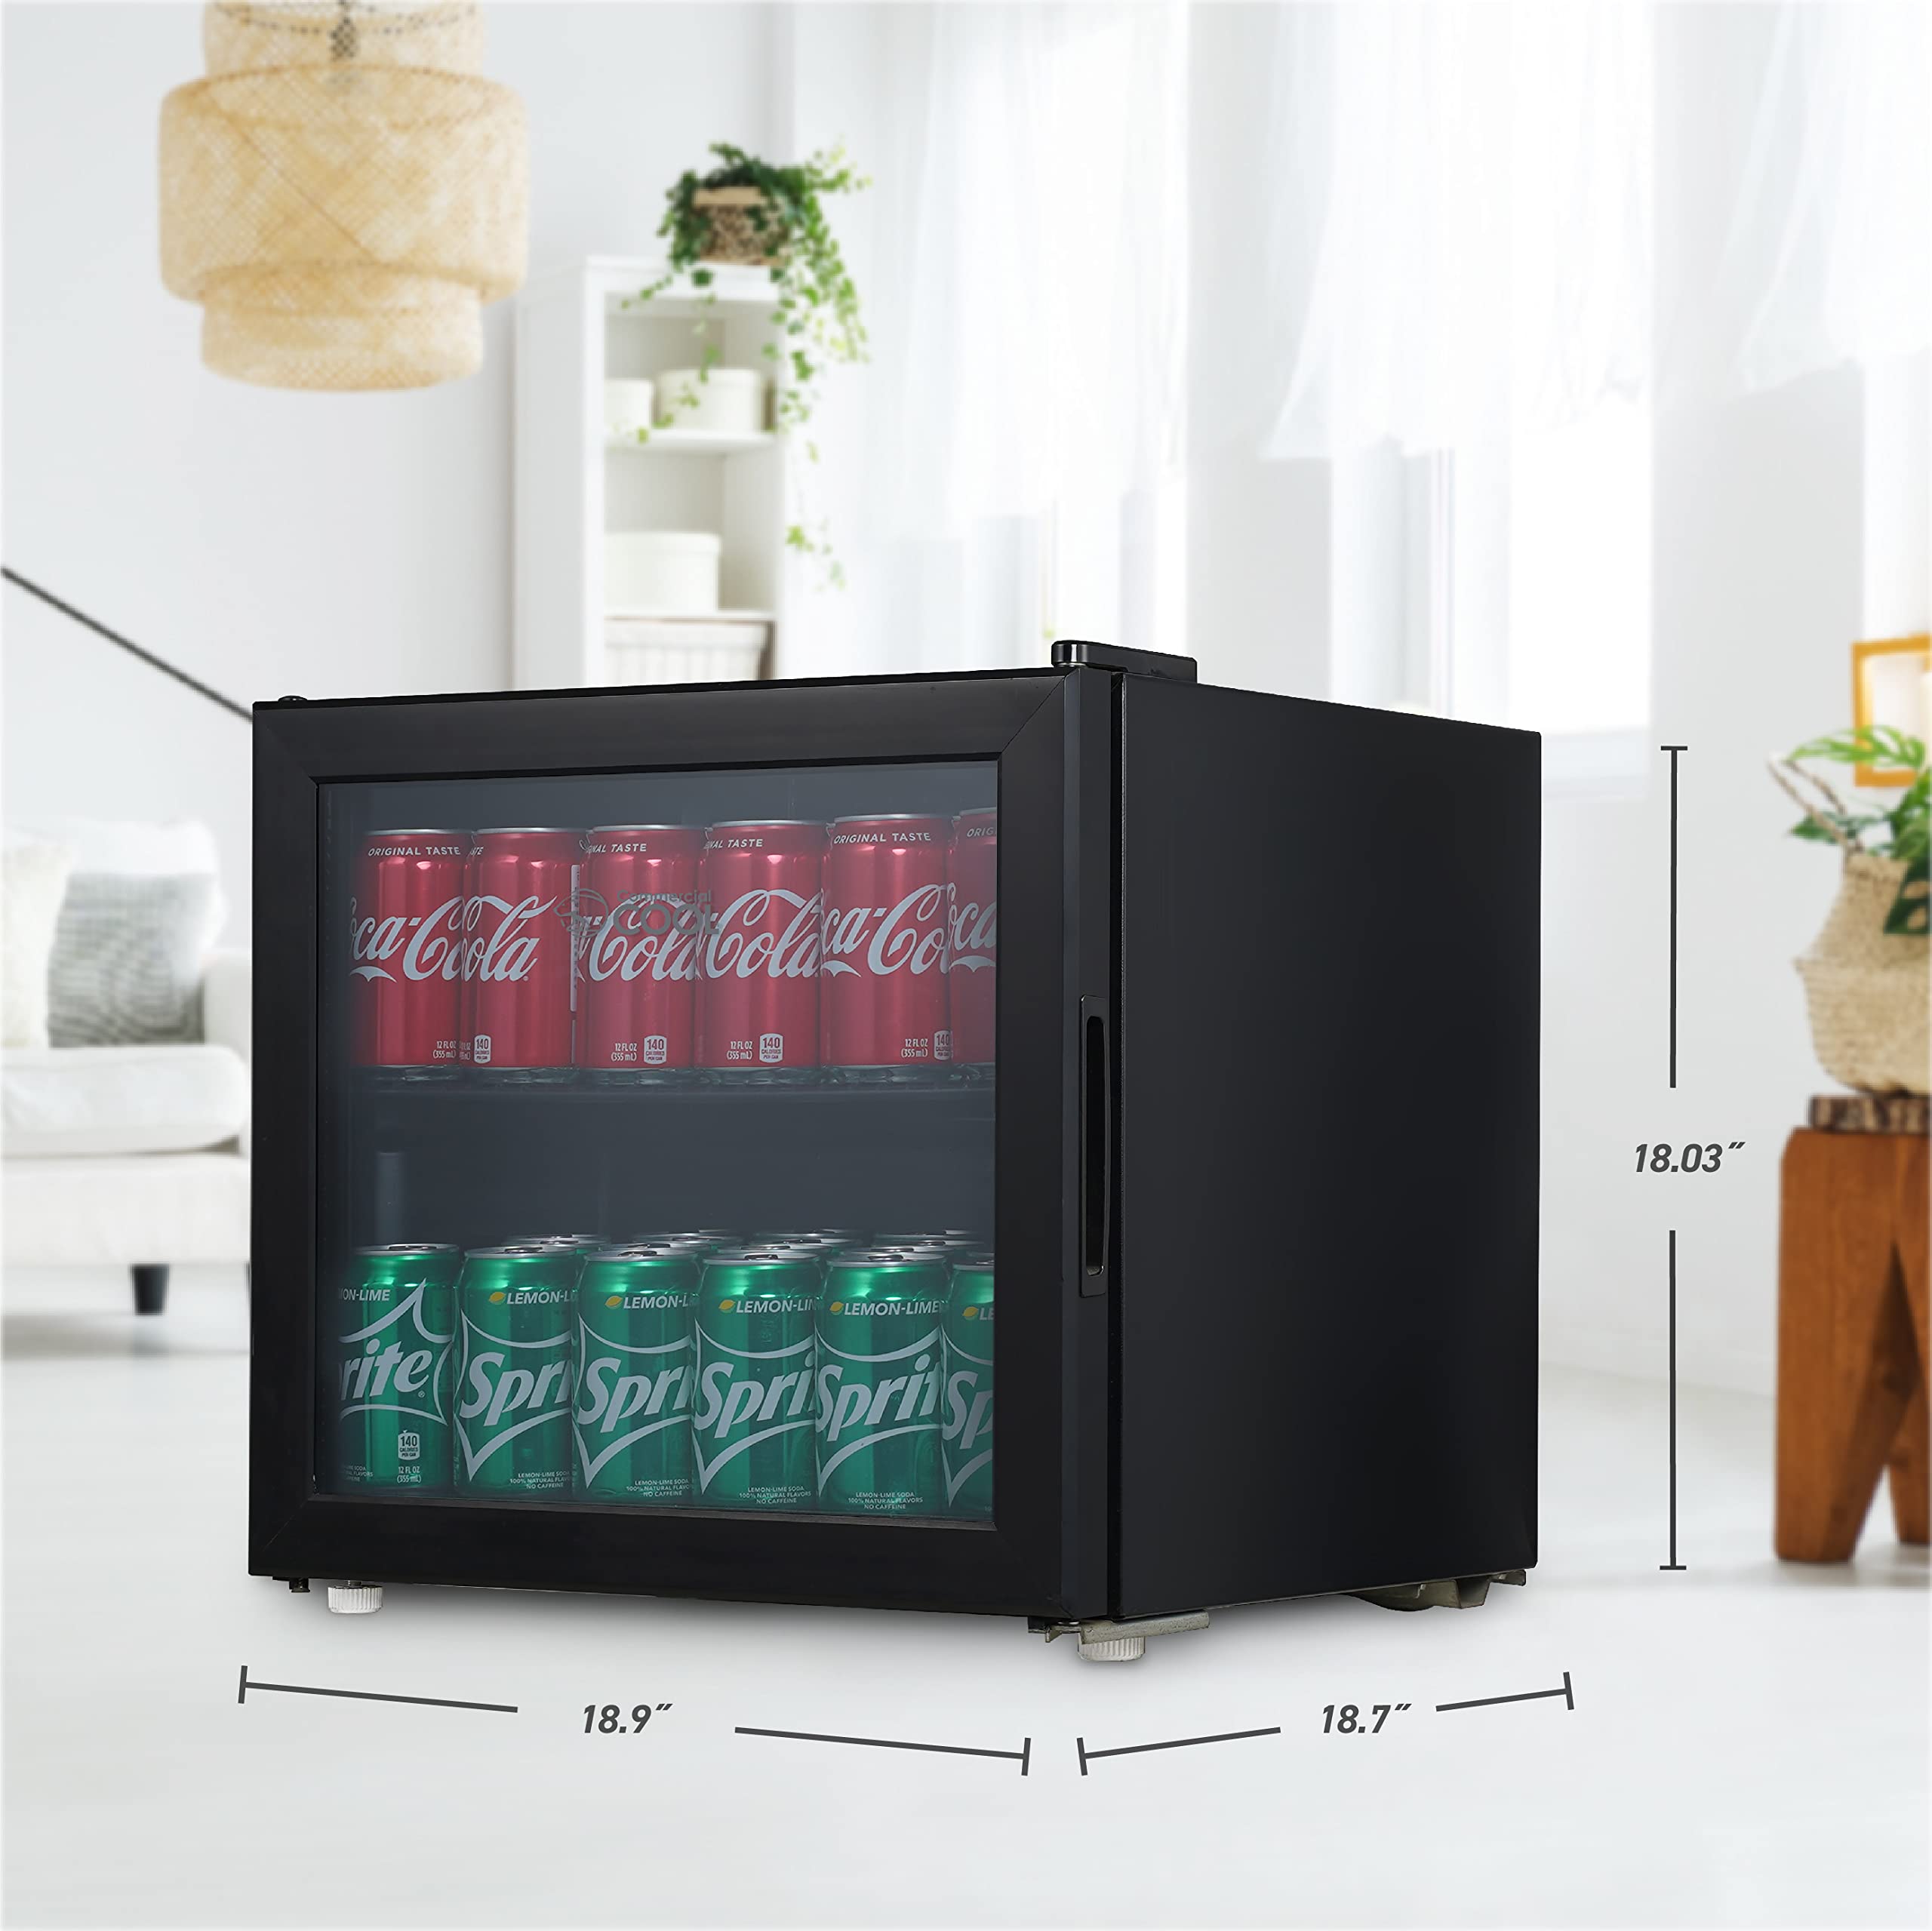 Commercial Cool Beverage Cooler, 1.7 Cu. Ft. Capacity, Drink Fridge with Adjustable Shelf & Temperature Control, Mini Beverage Fridge Holds up to 51 Cans